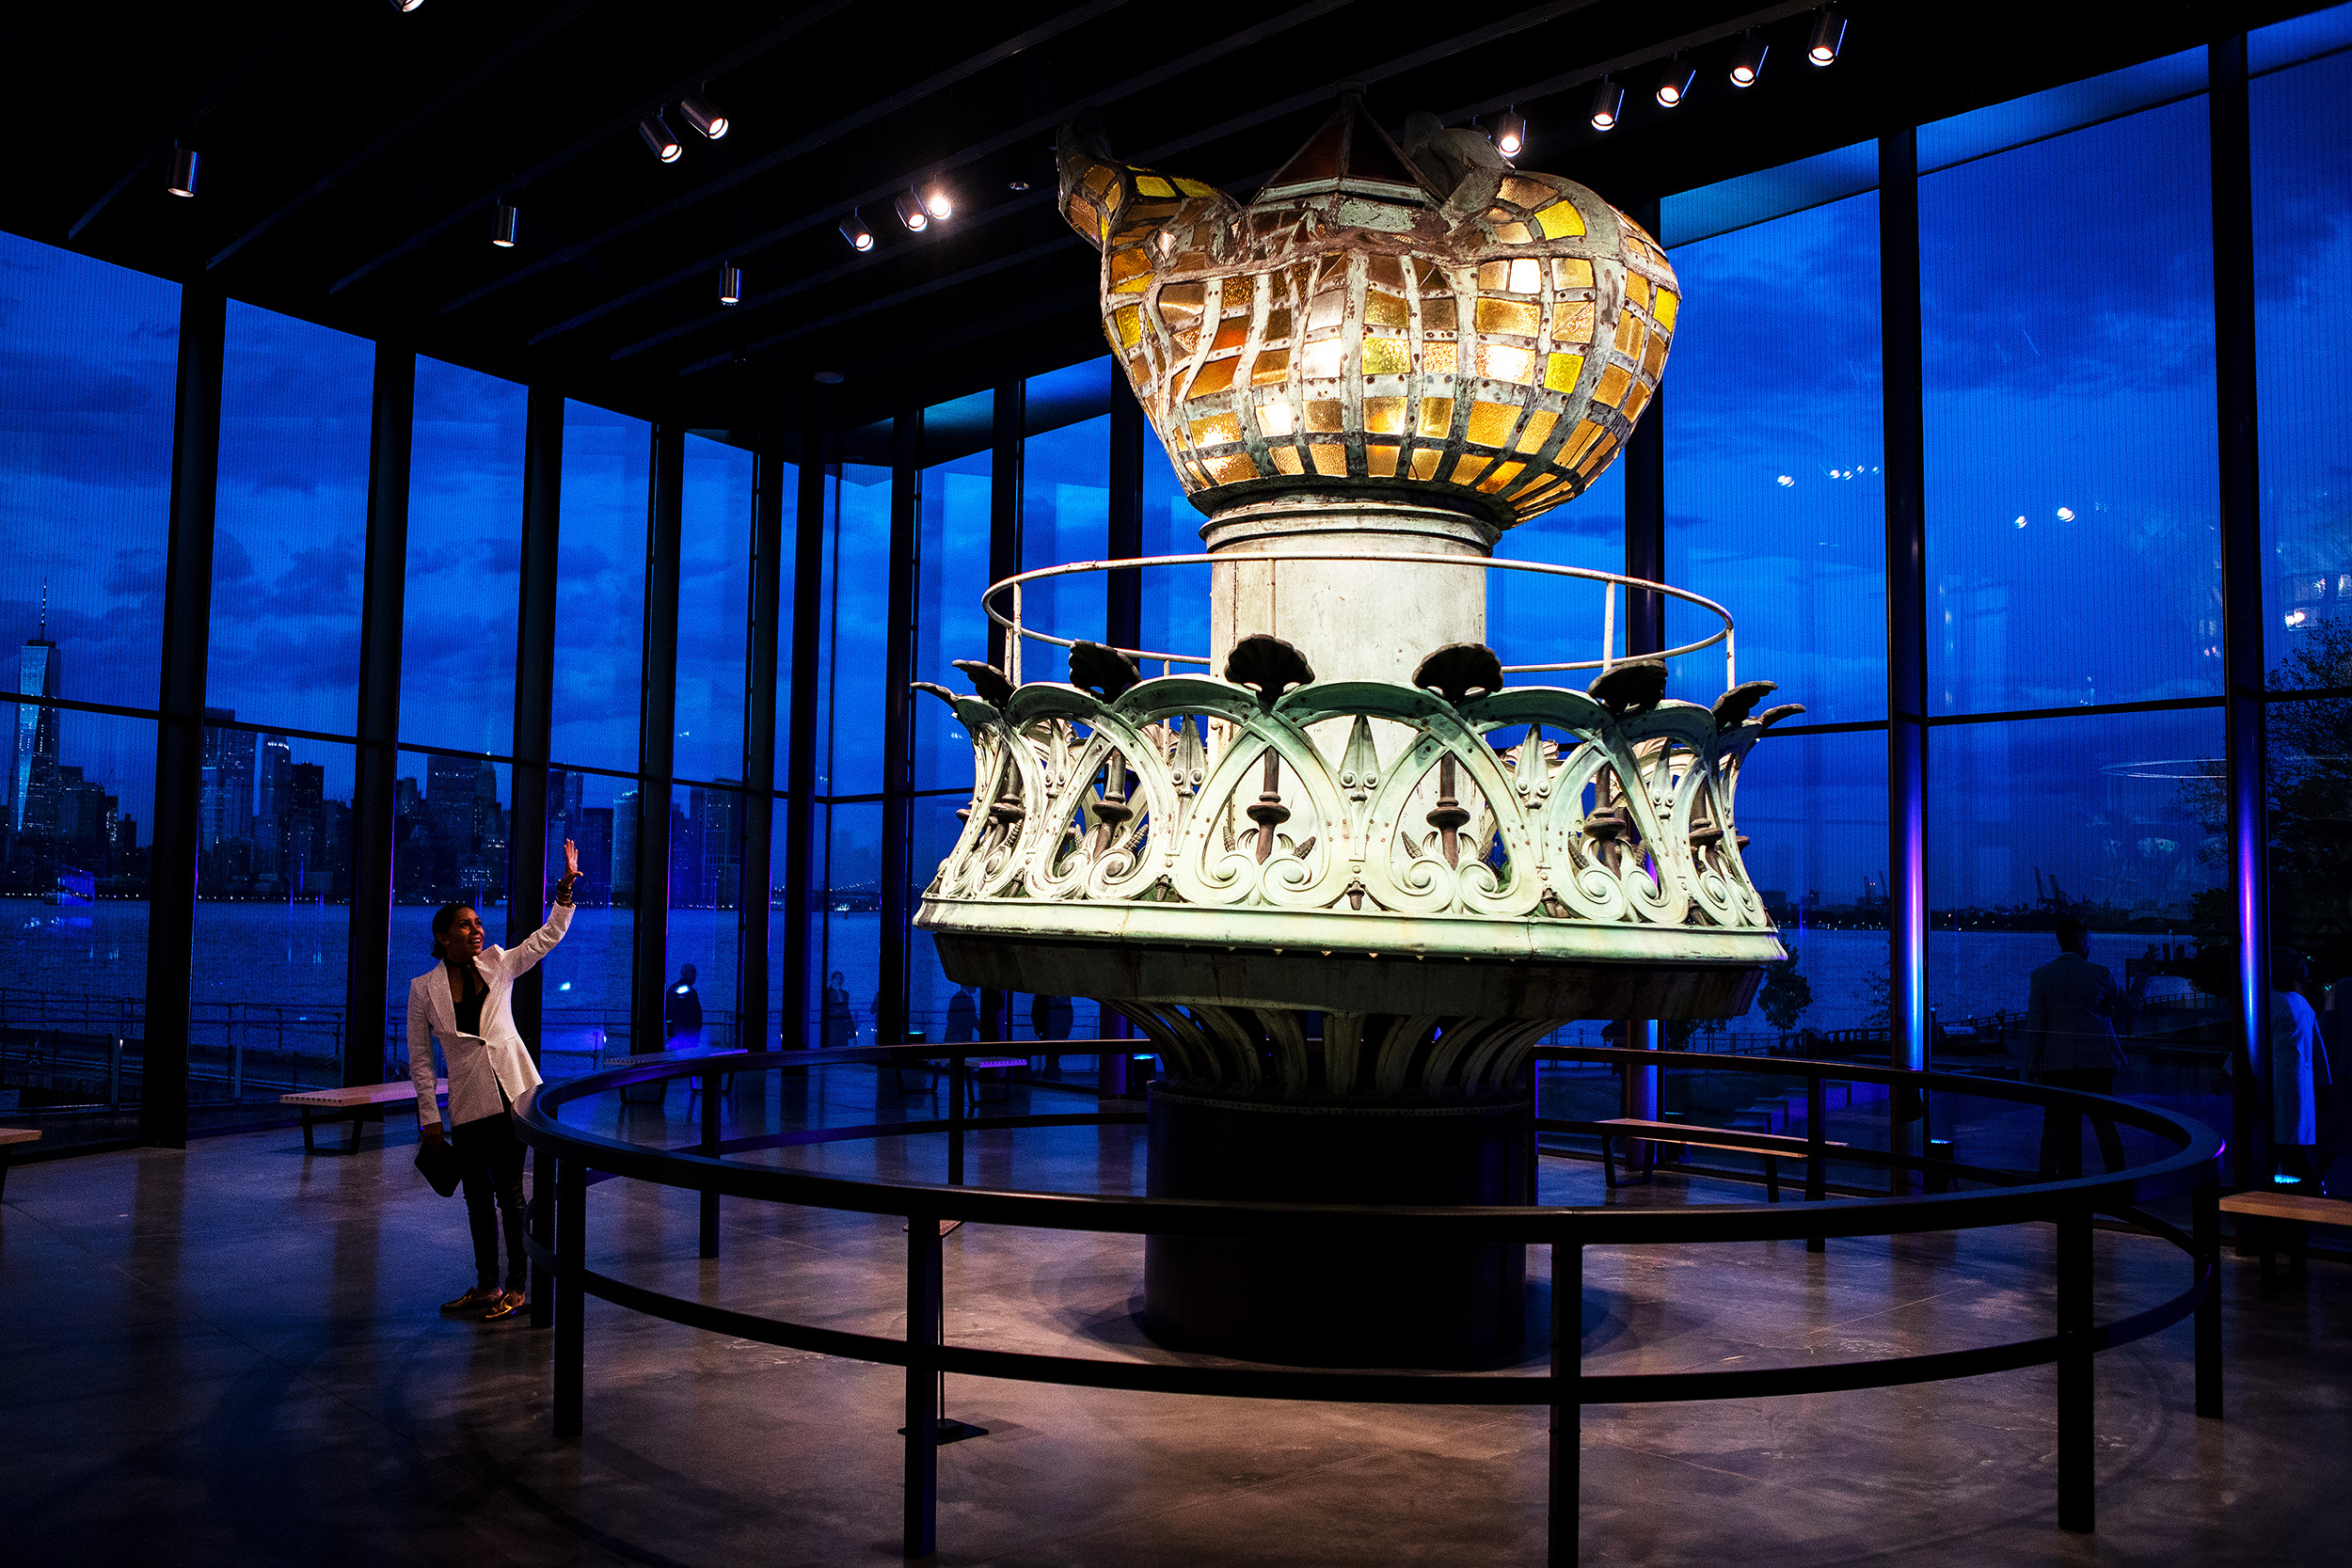  The original torch on display at the Statue of Liberty Museum on Liberty Island in New York, U.S.. The event feature keynote address from Oprah Winfrey and performances by Gloria Estefan and Tony Bennett. 